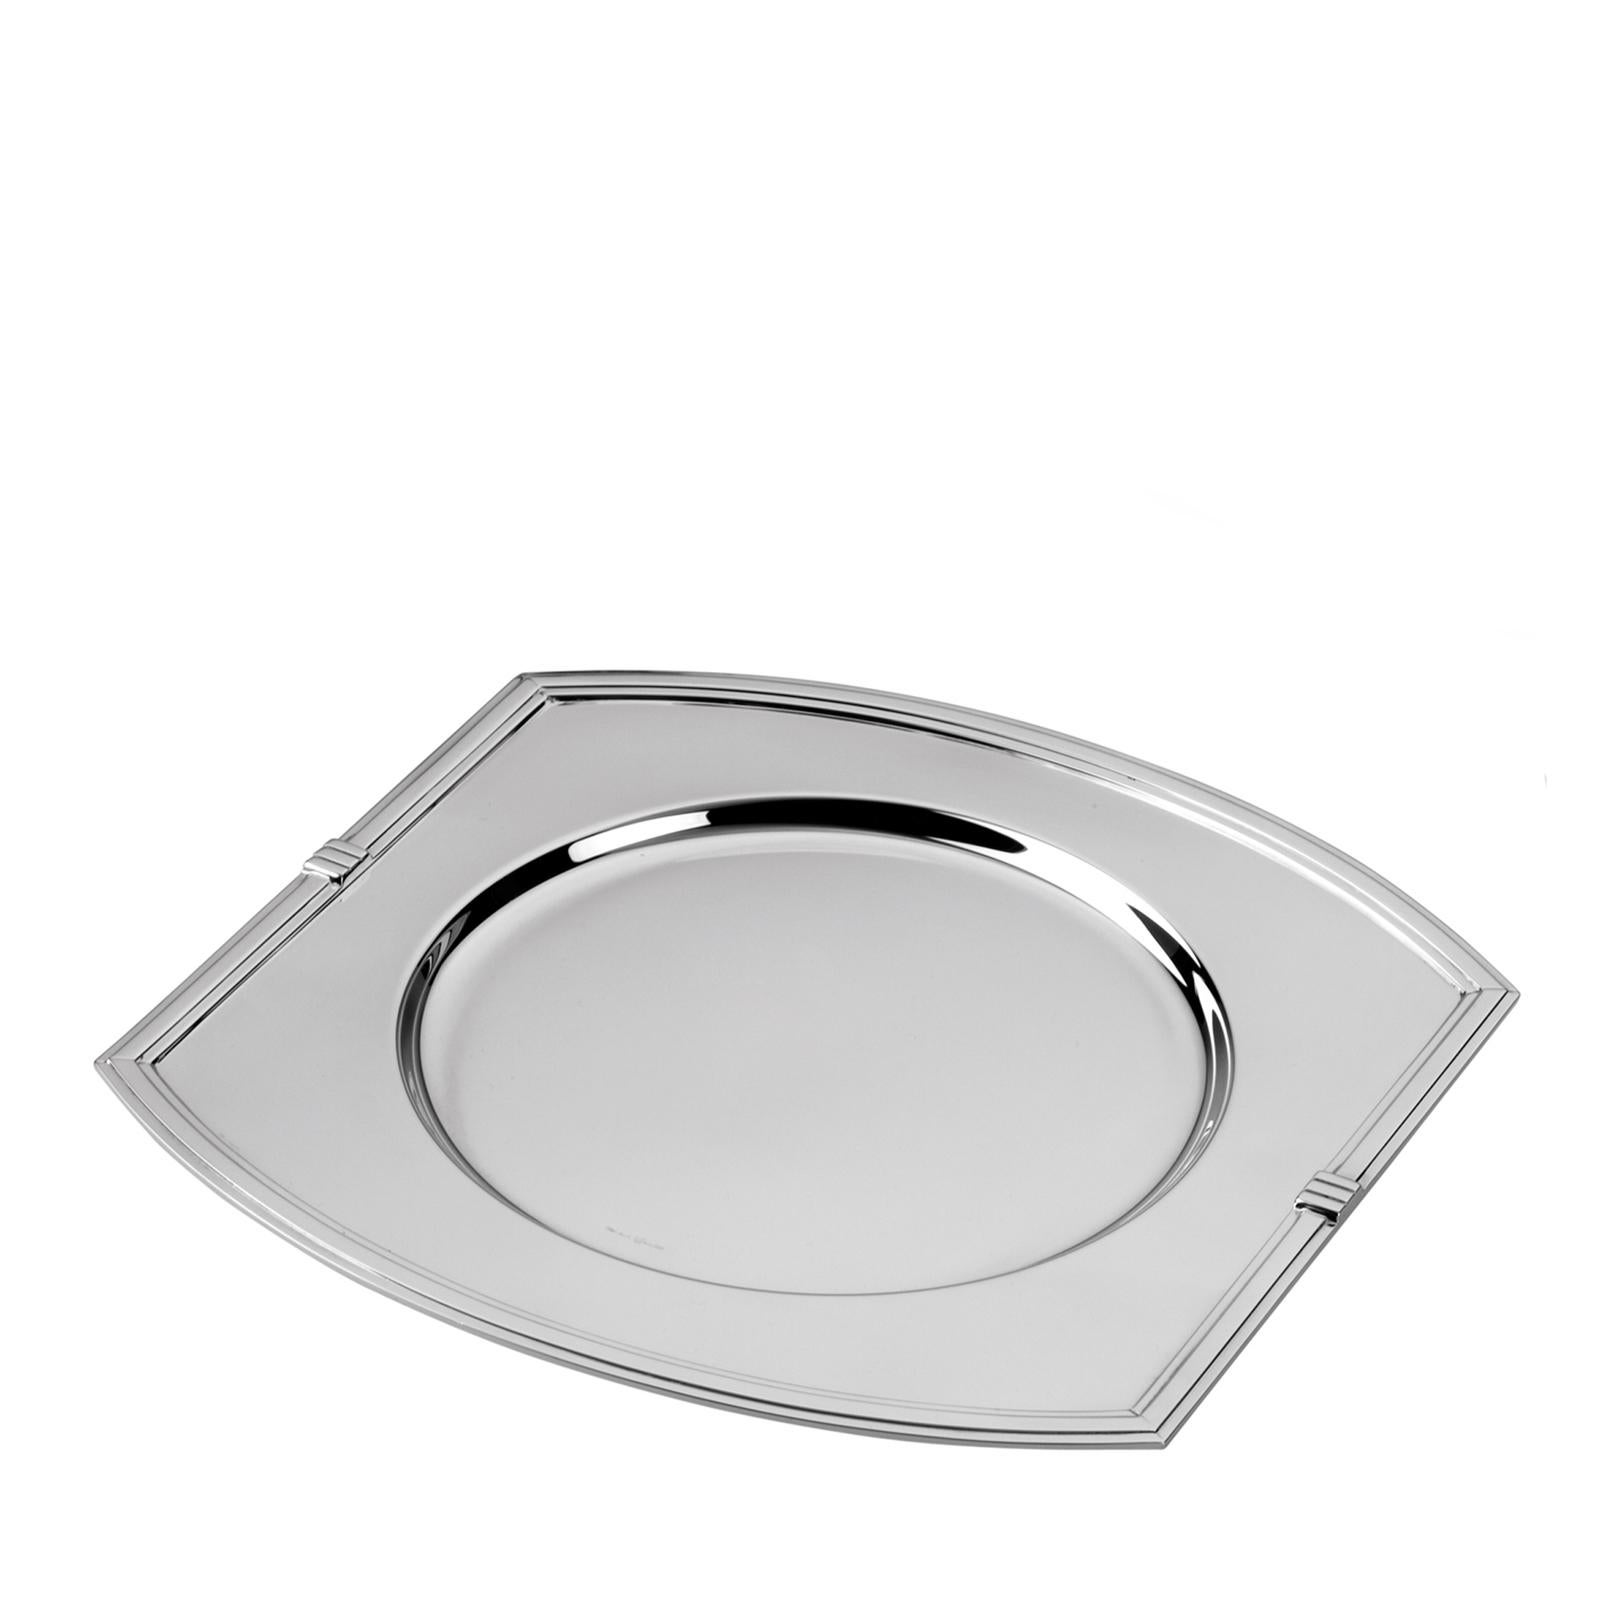 The Novecento collection, inspired by the Art Deco style, offers functionality alongside classical details that are effortlessly timeless. This elegant charger plate features a rectangular Silhouette, slightly curved top and bottom sides, and sharp